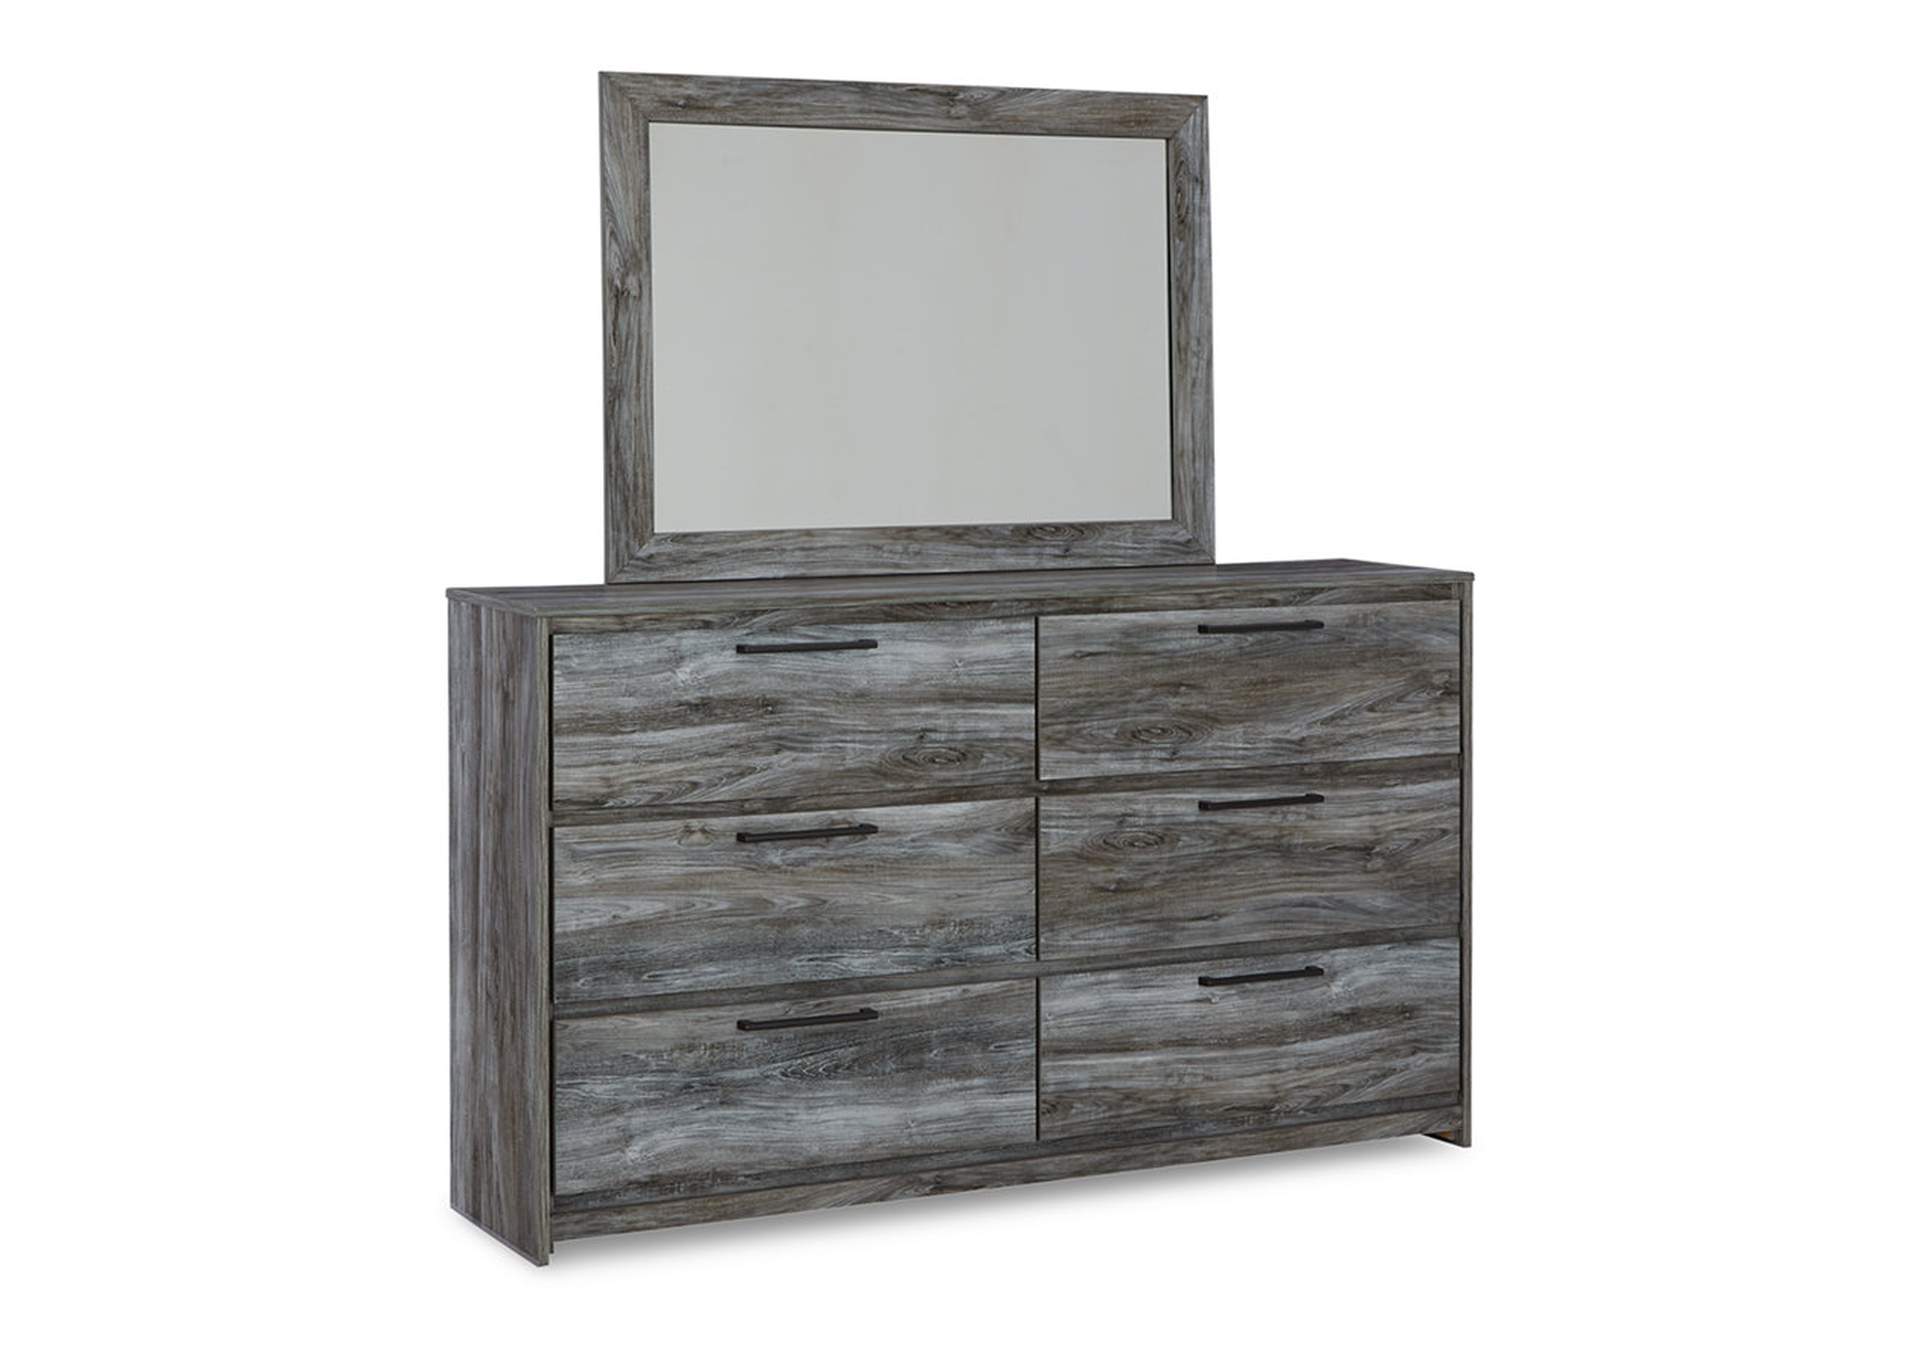 Baystorm King Panel Headboard, Dresser and Mirror,Signature Design By Ashley